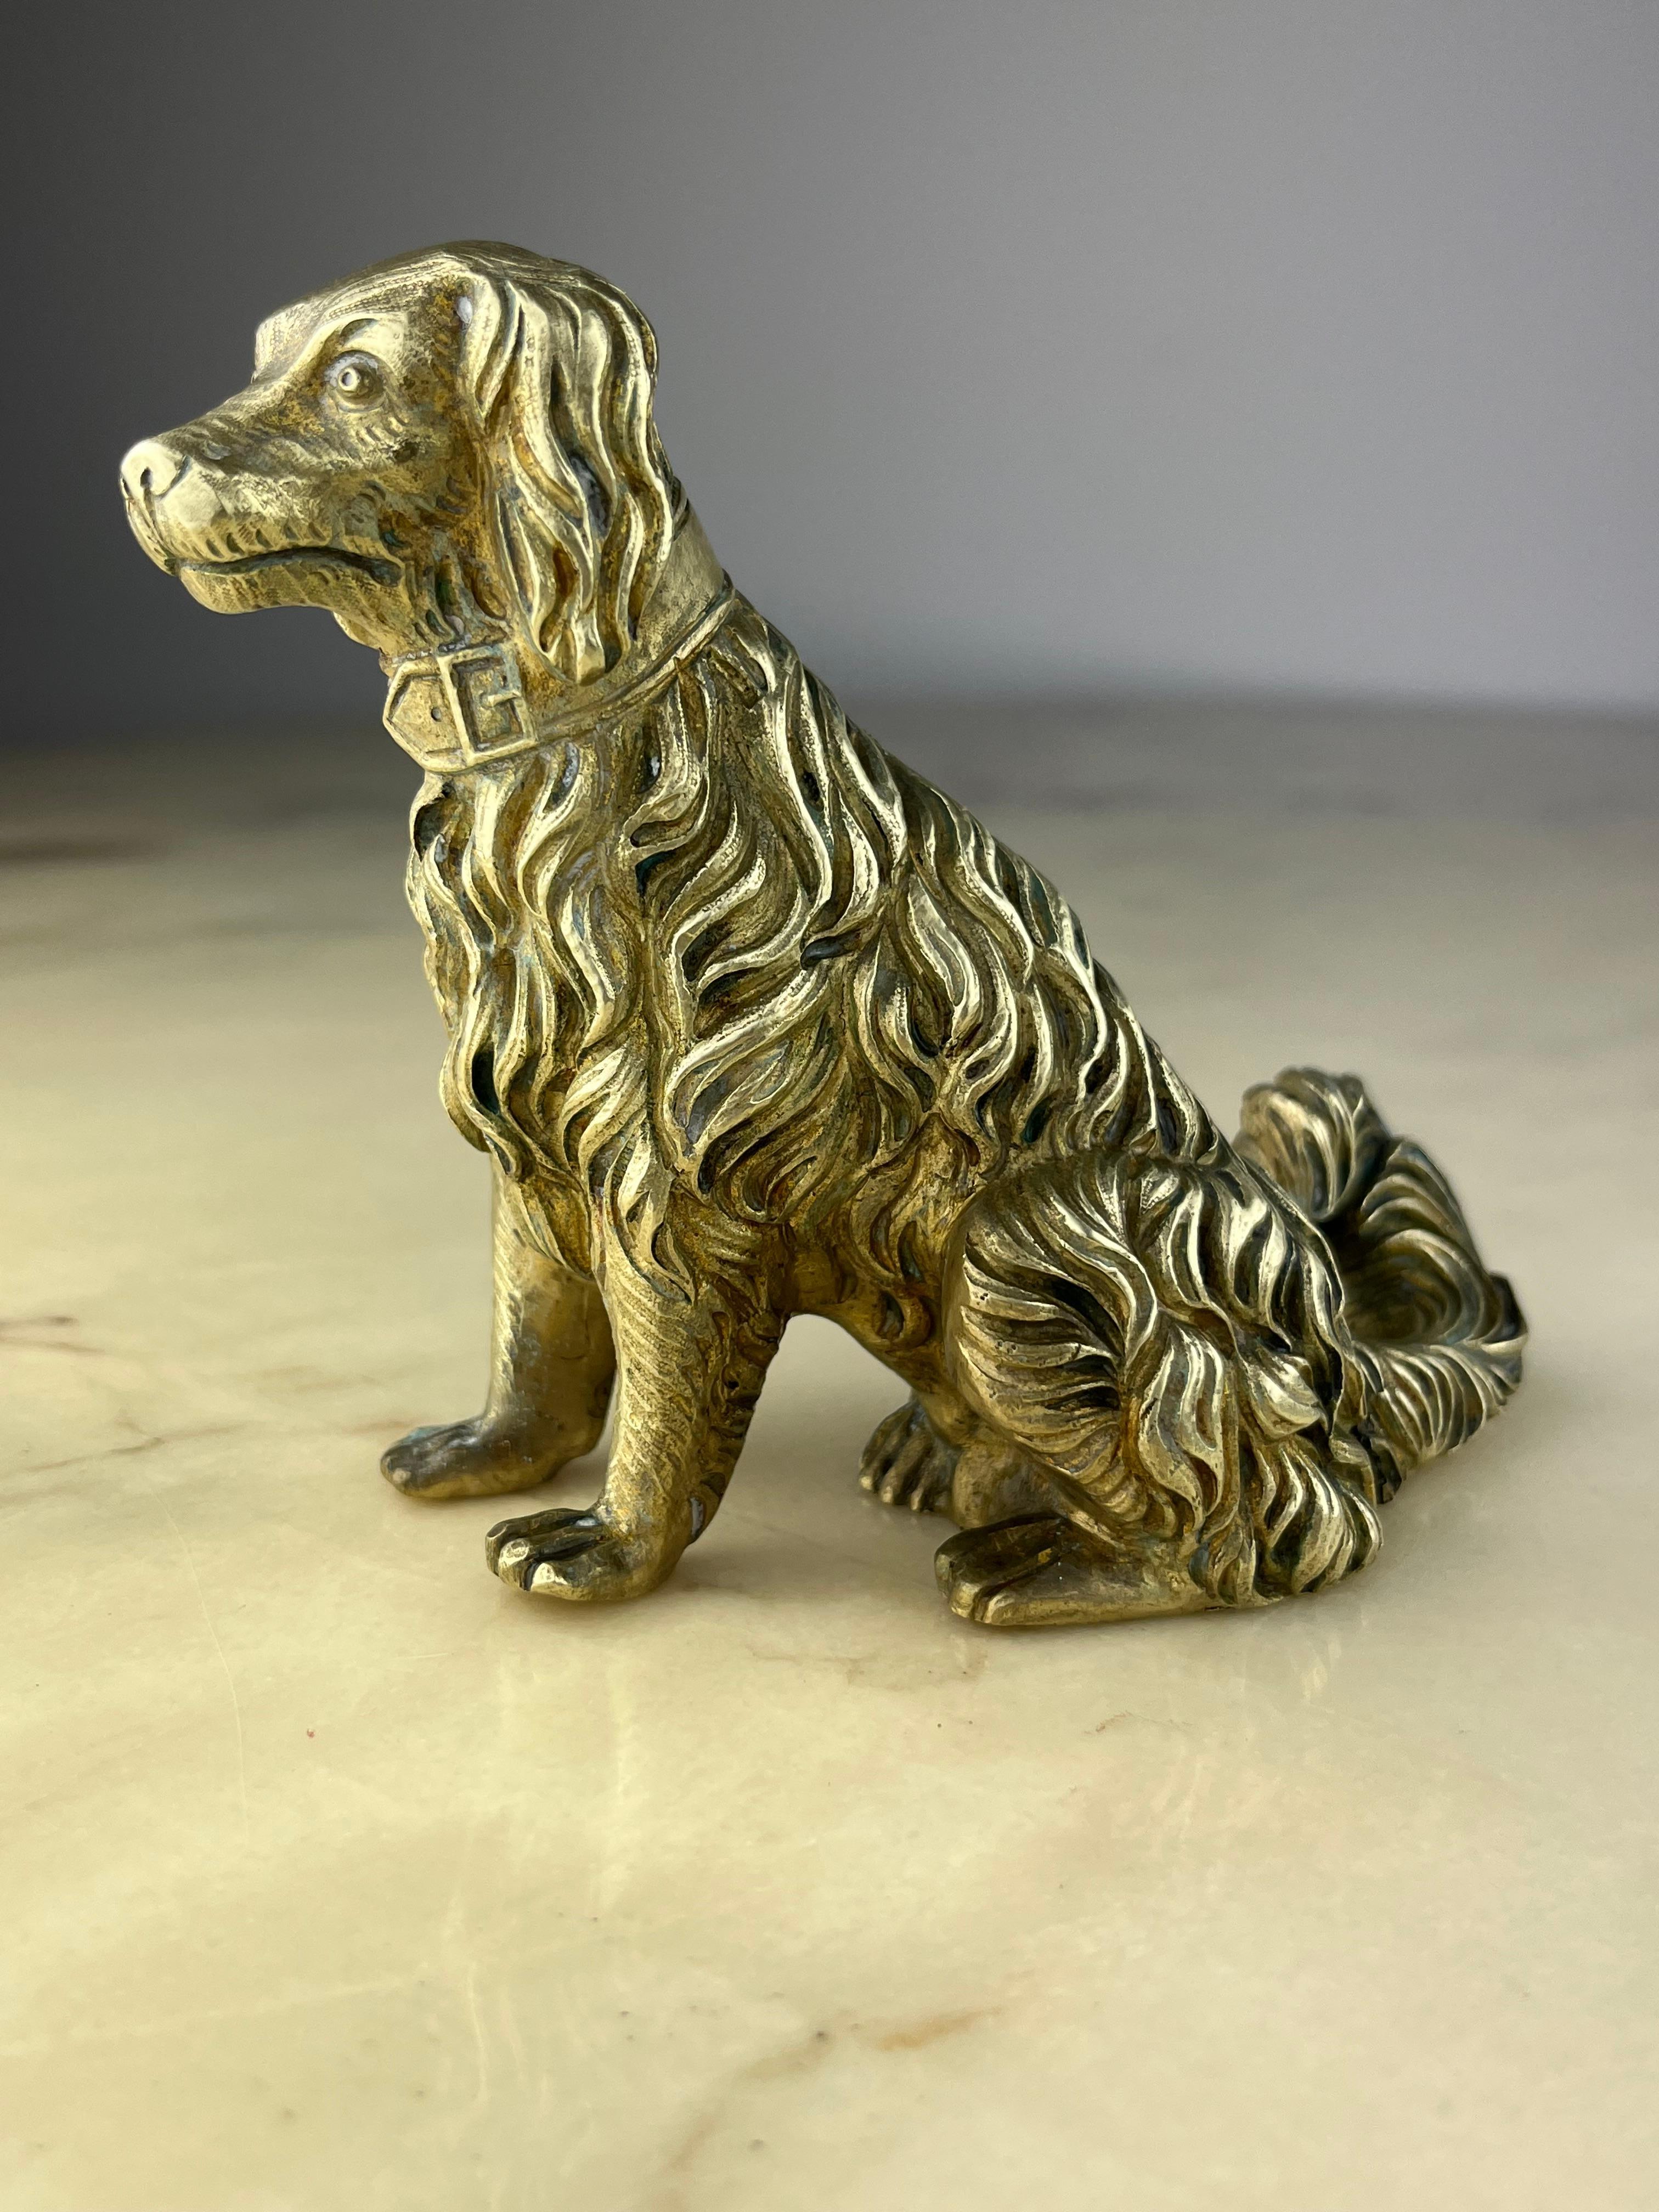 Brass dog, made in Italy, 1960s.
Great as a desk paperweight. Small signs of time and use. It has a small slit at the bottom.
Found in a noble apartment in the Sicilian hinterland.